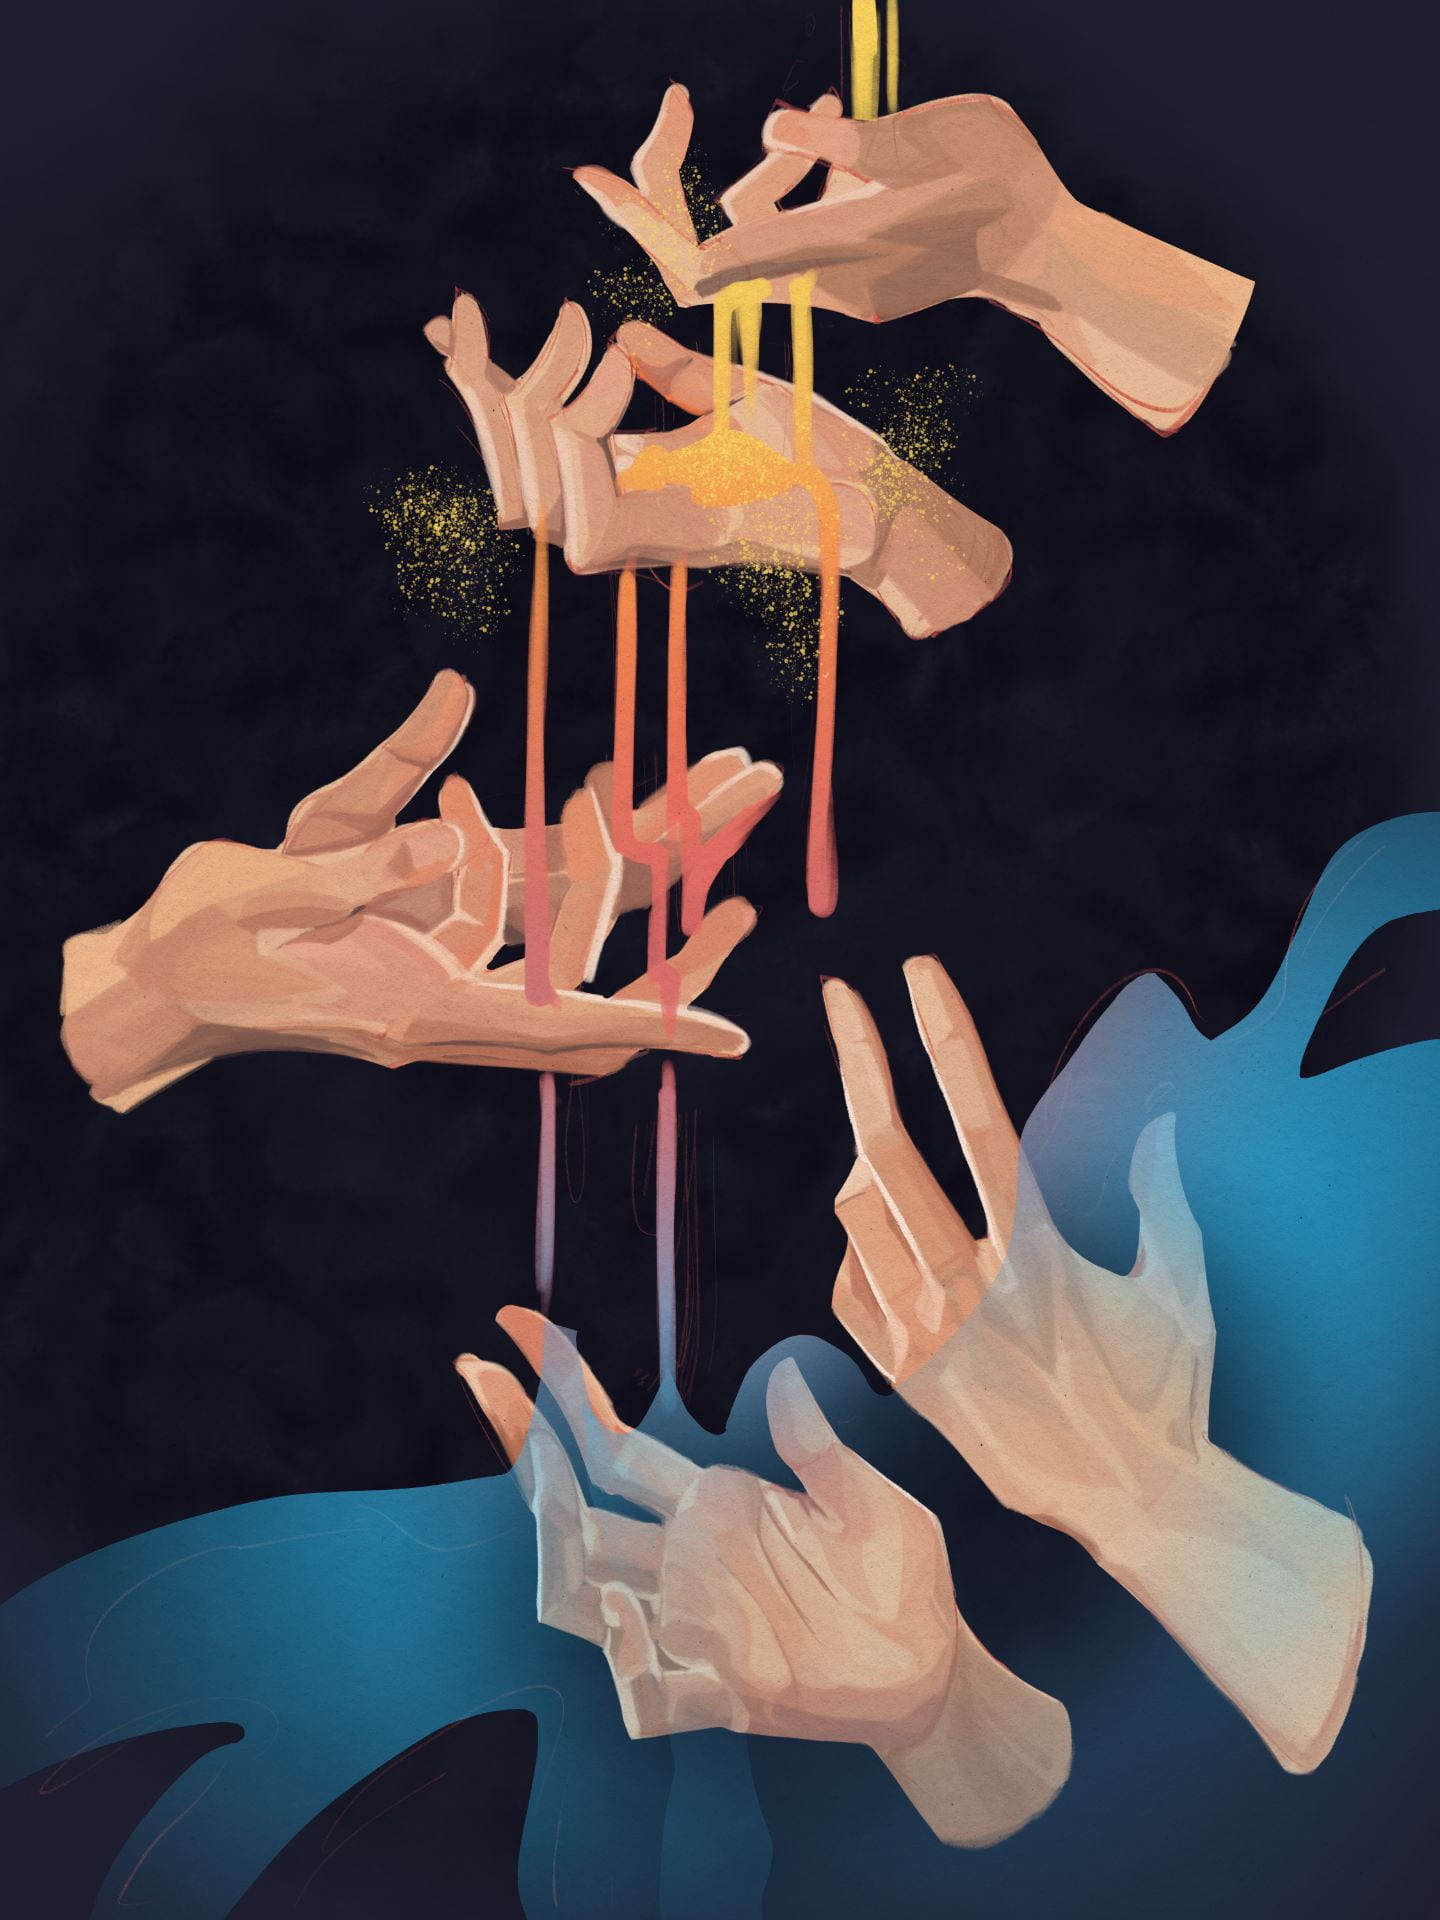 image of red liquid falling past five hands reaching against a blue background